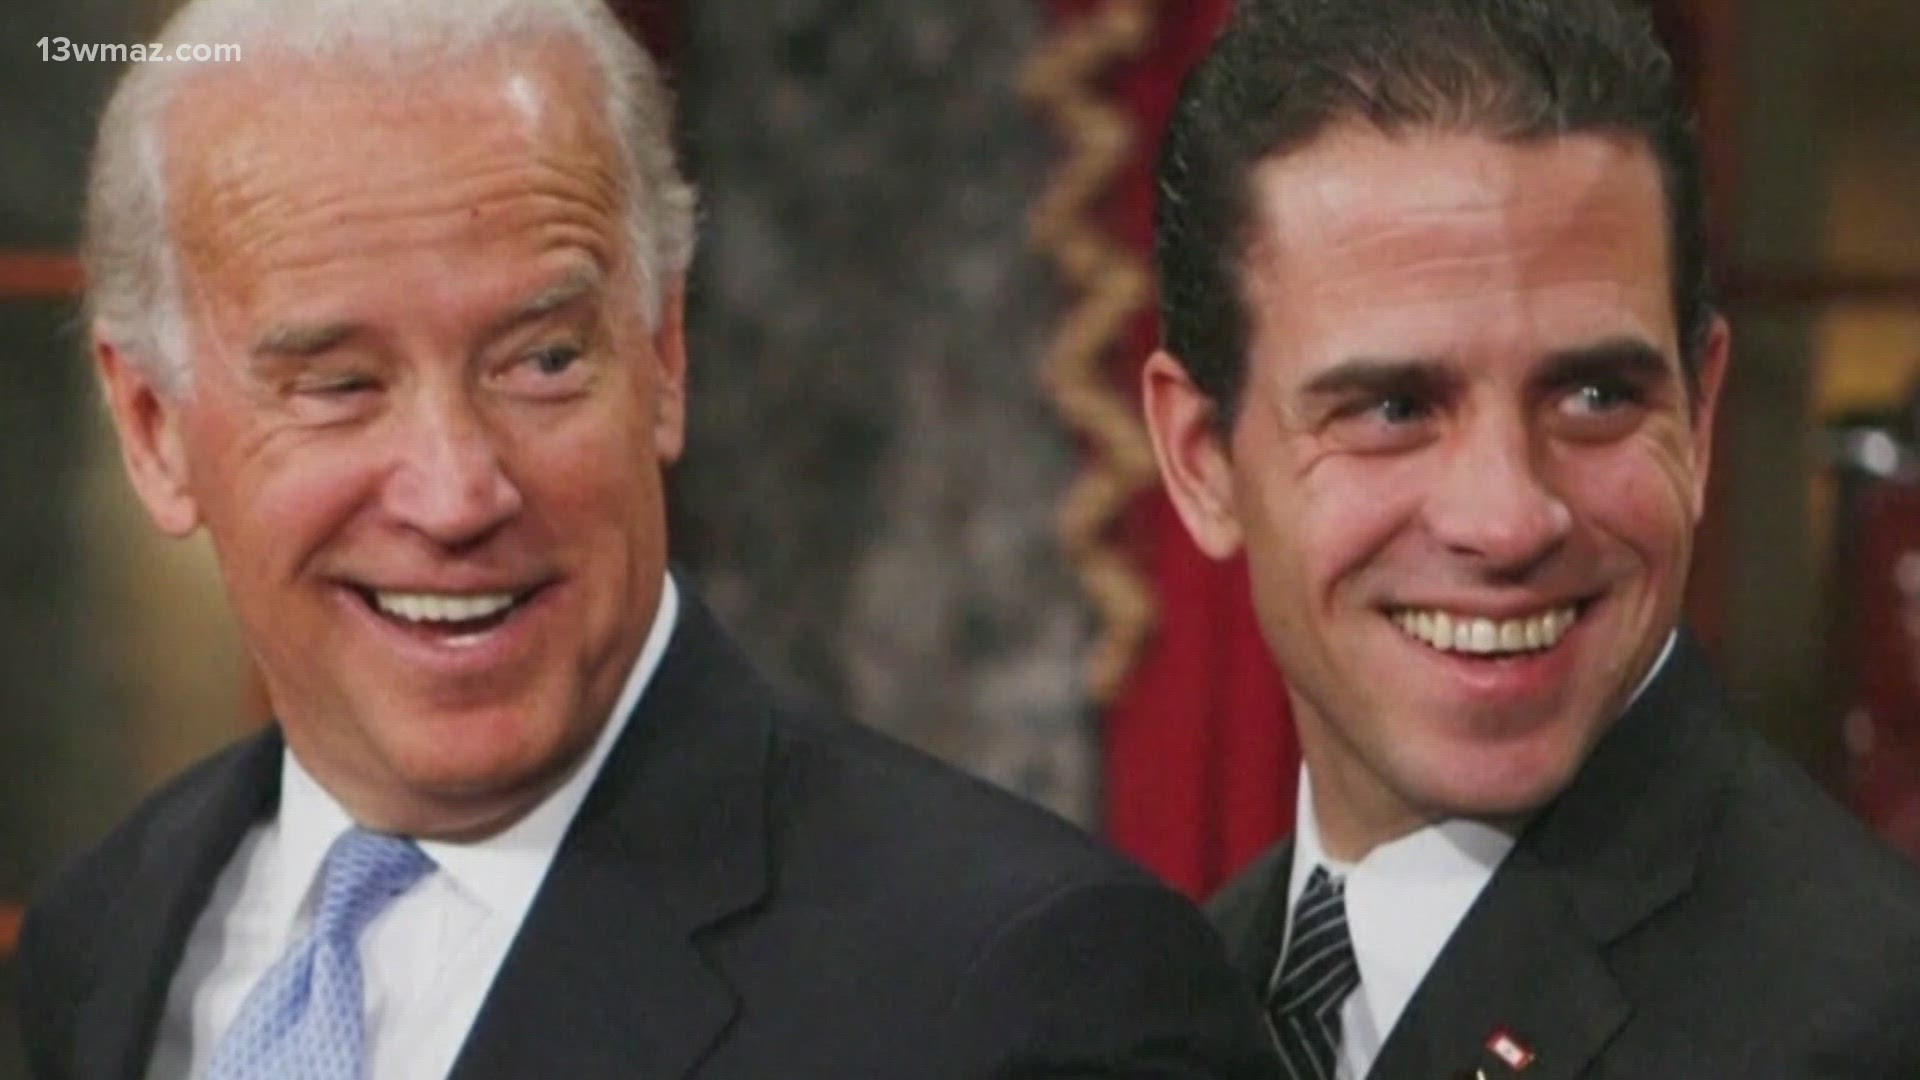 Hunter Biden was indicted by a grand jury on gun charges. He is facing charges of lying on a form. He said on a form he was not using drugs when he allegedly was